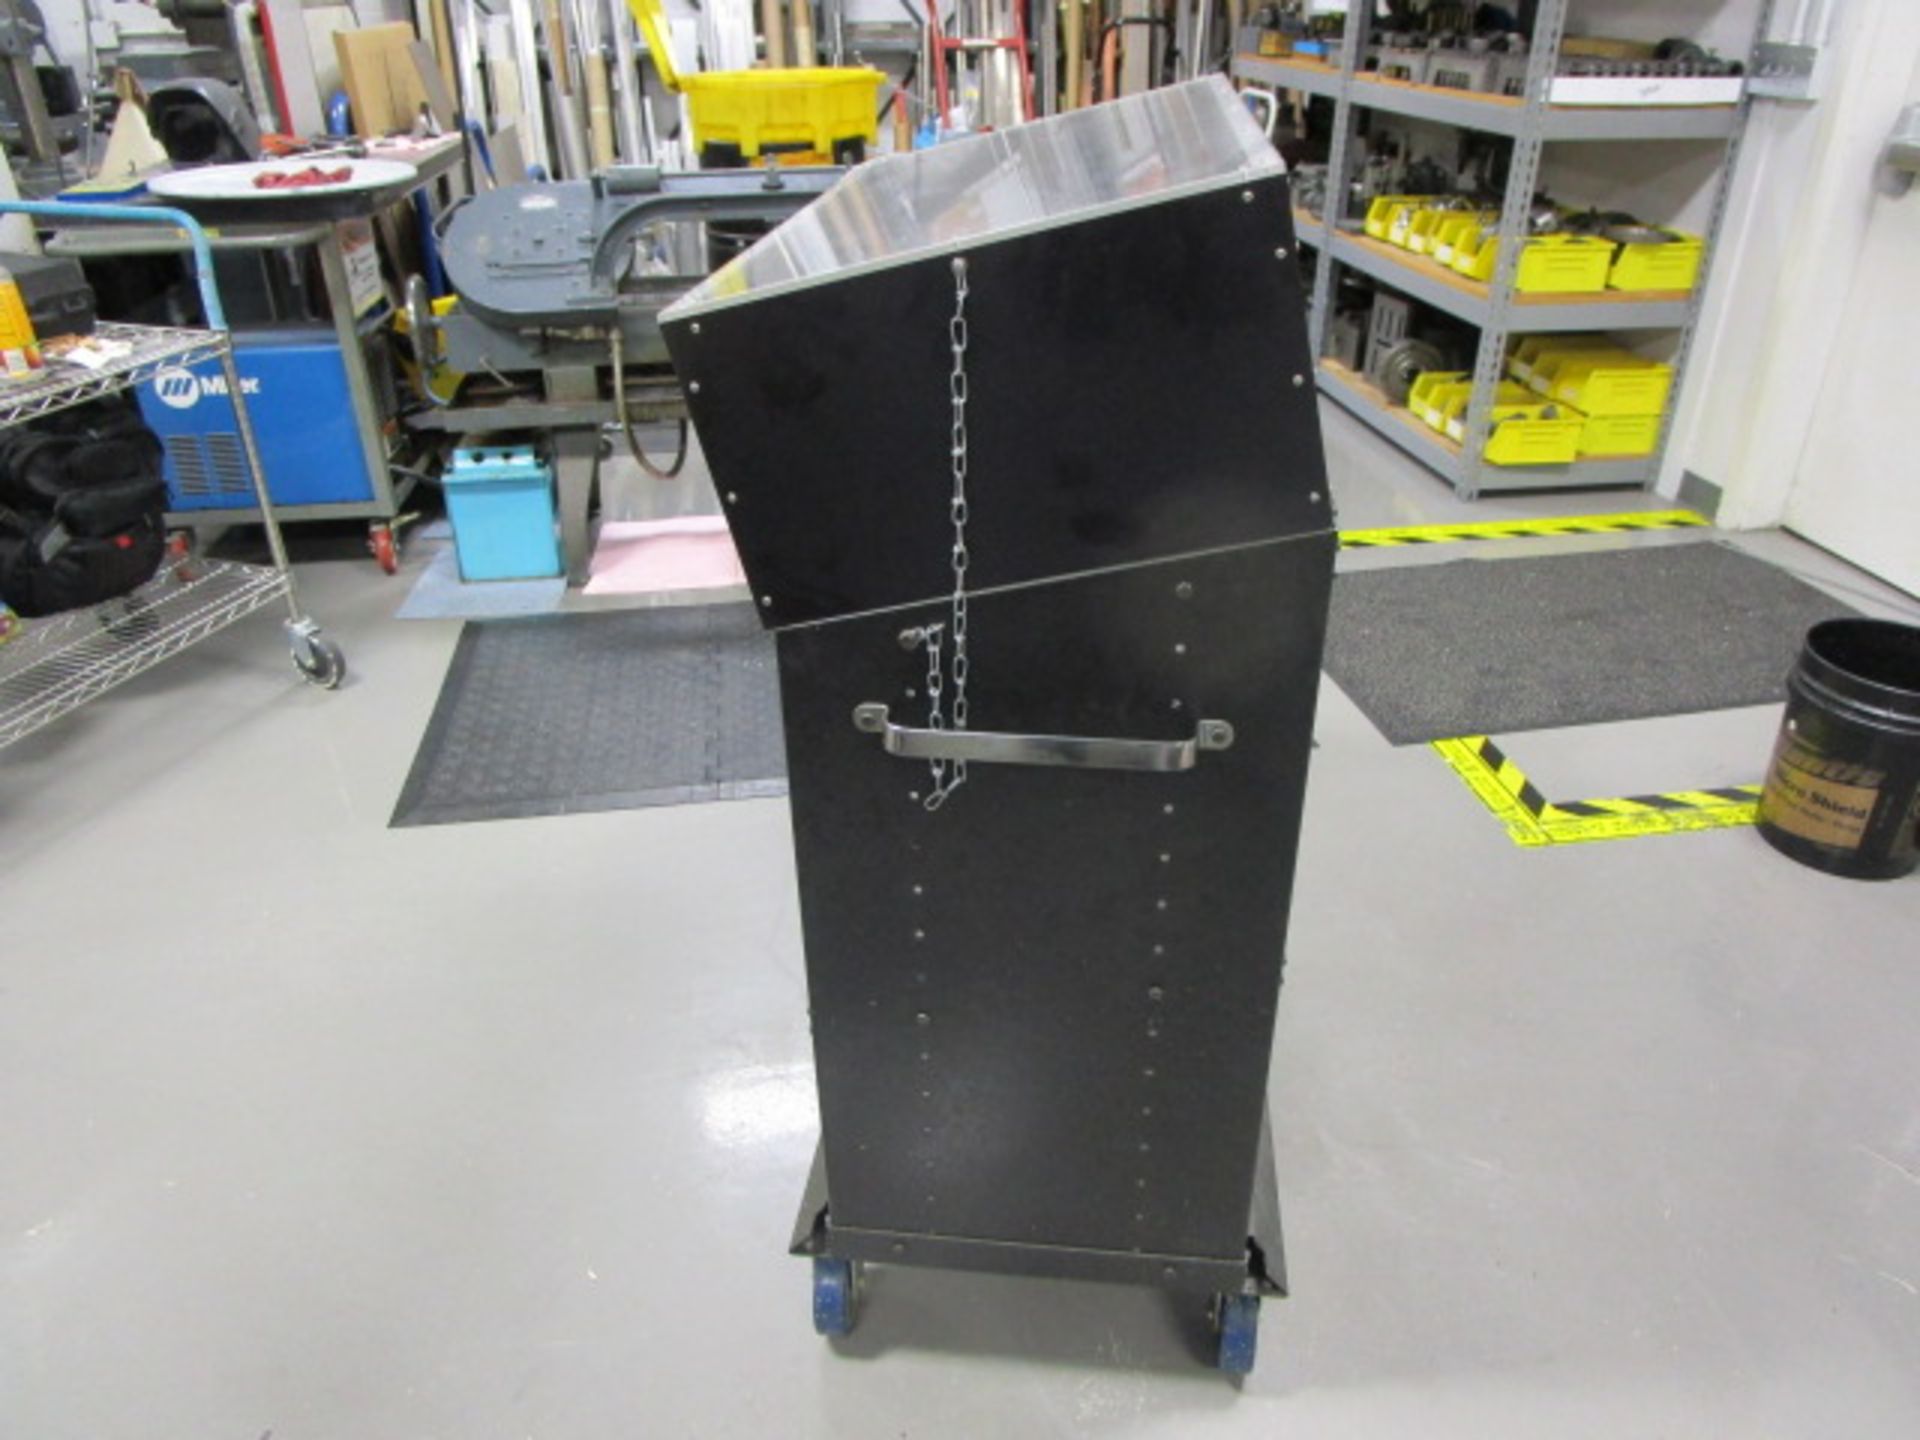 HUOT SUPERSCOOT CART WITH TOOLING CONTENT FOR DAEWOO DMV3016L CNC MILLING MACHINE TOOLING - CONCORD - Image 6 of 8